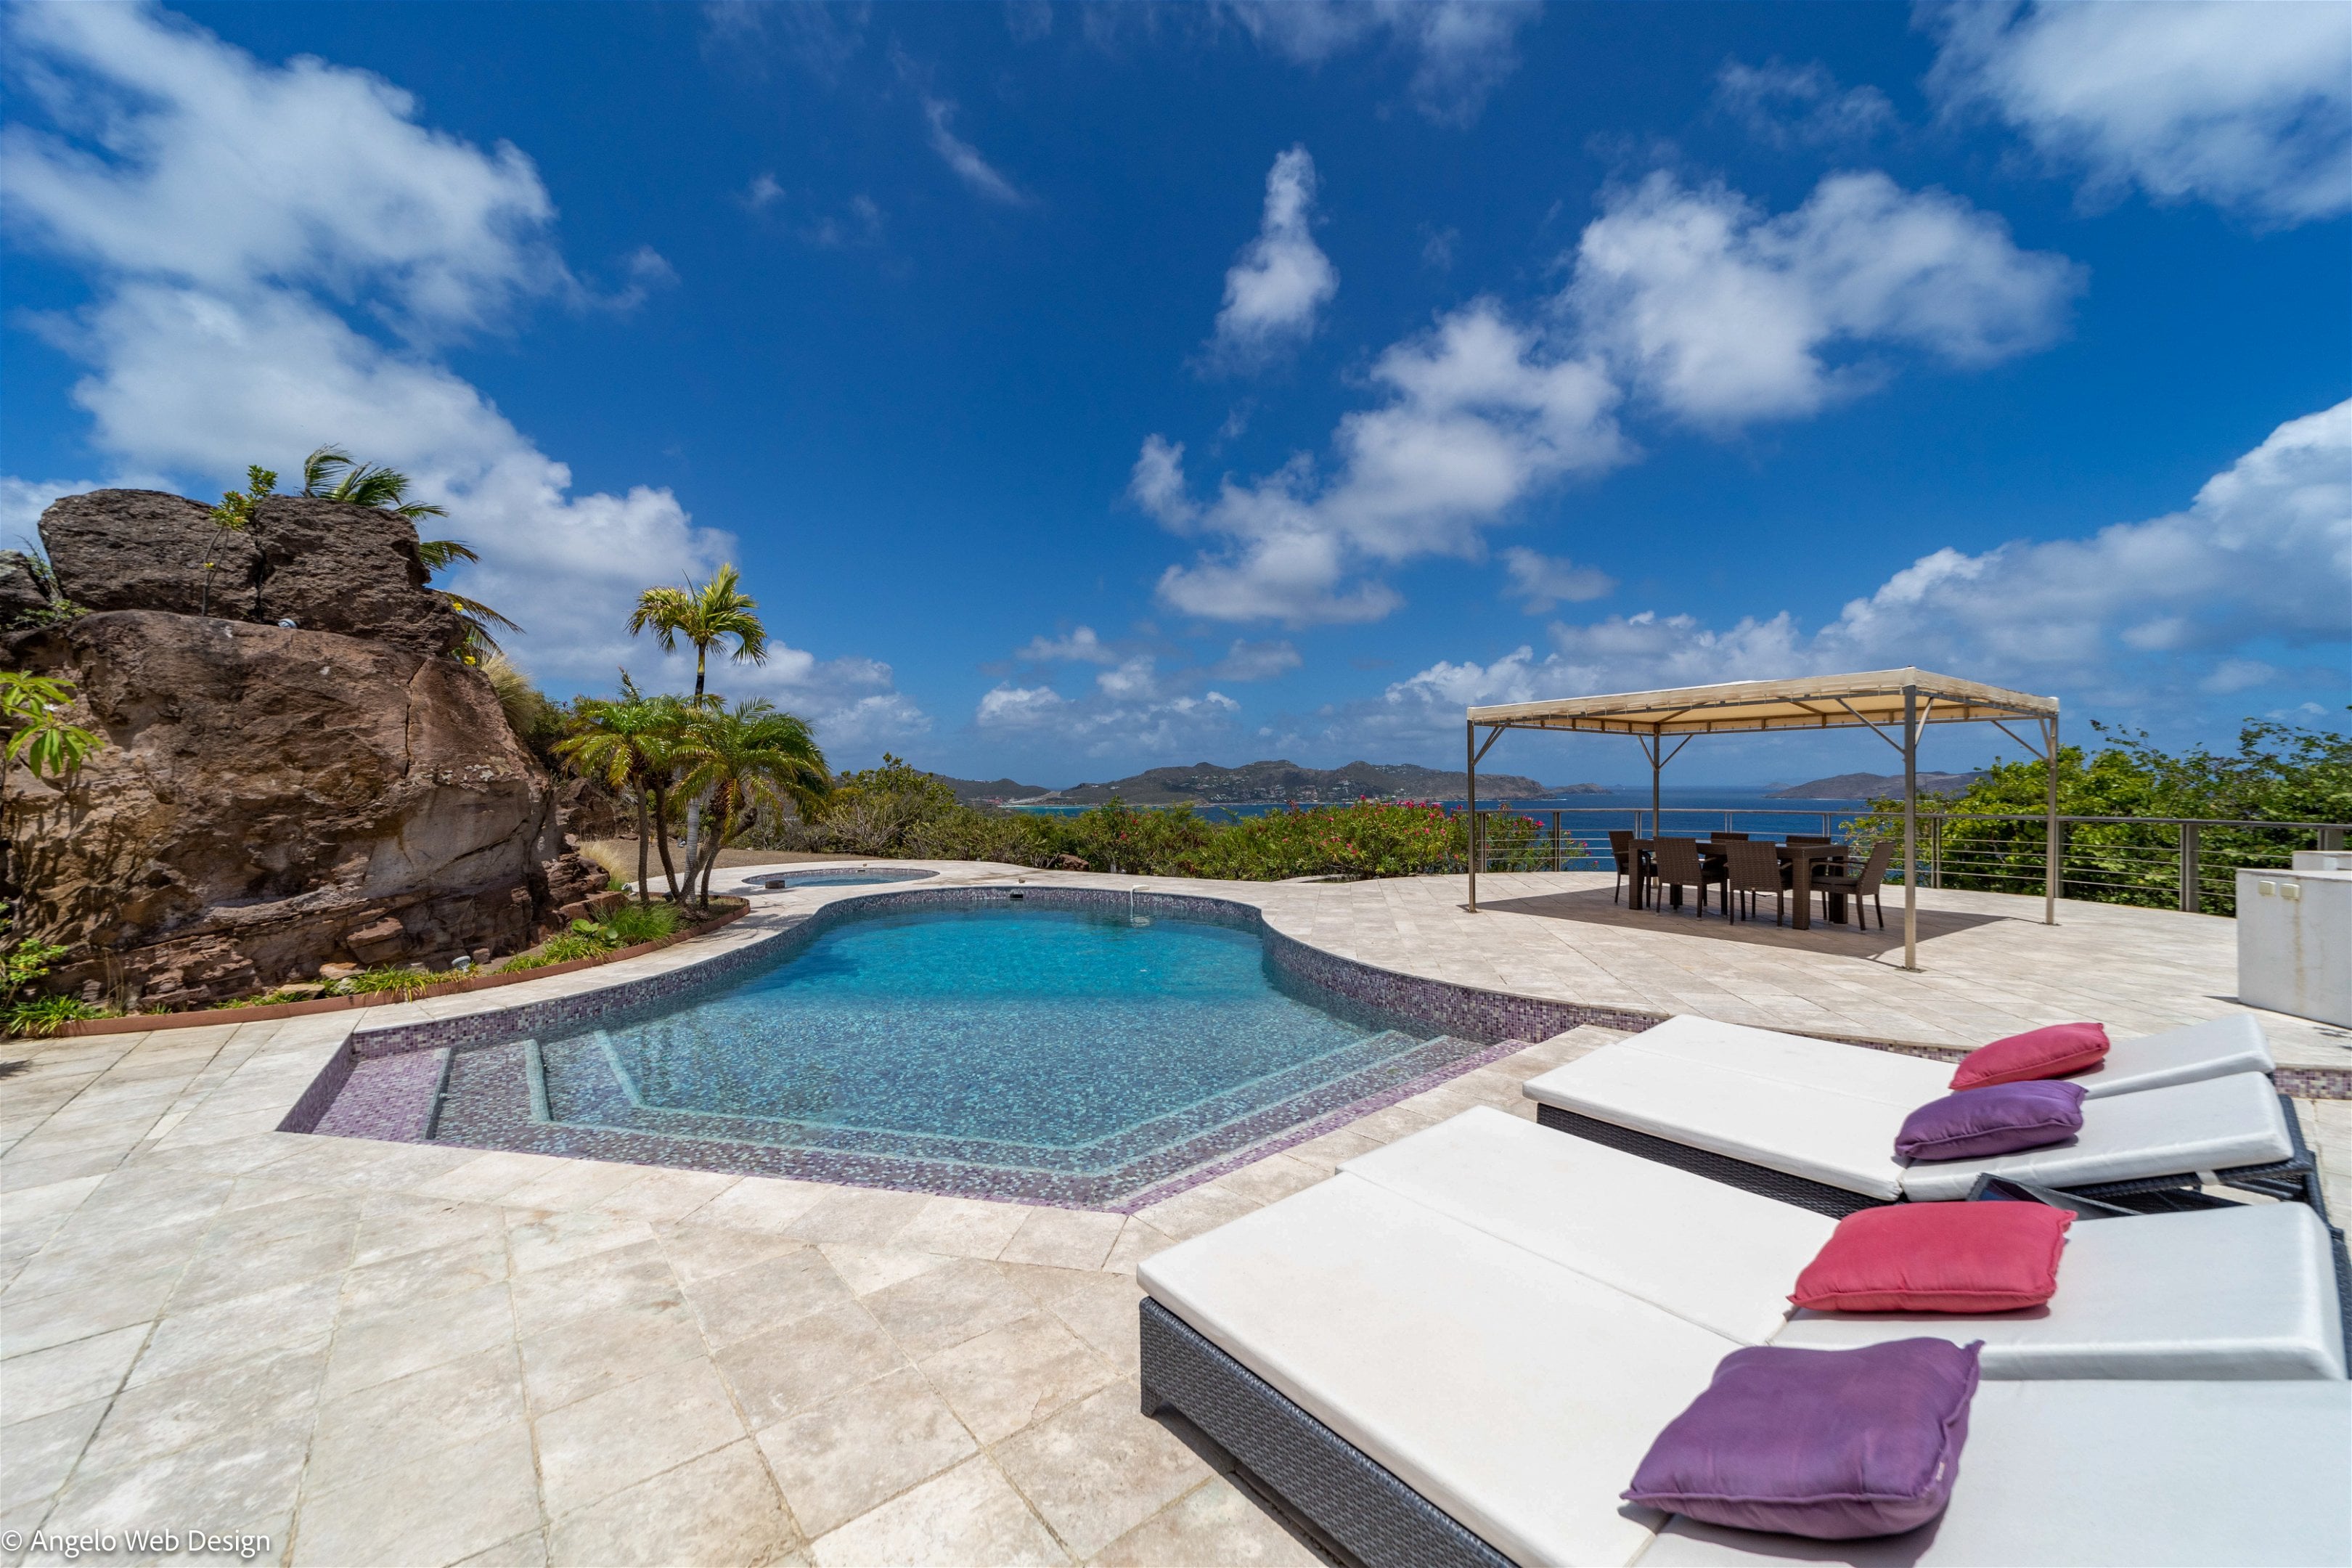 MY VILLA IN ST-BARTHS I Our concierge services